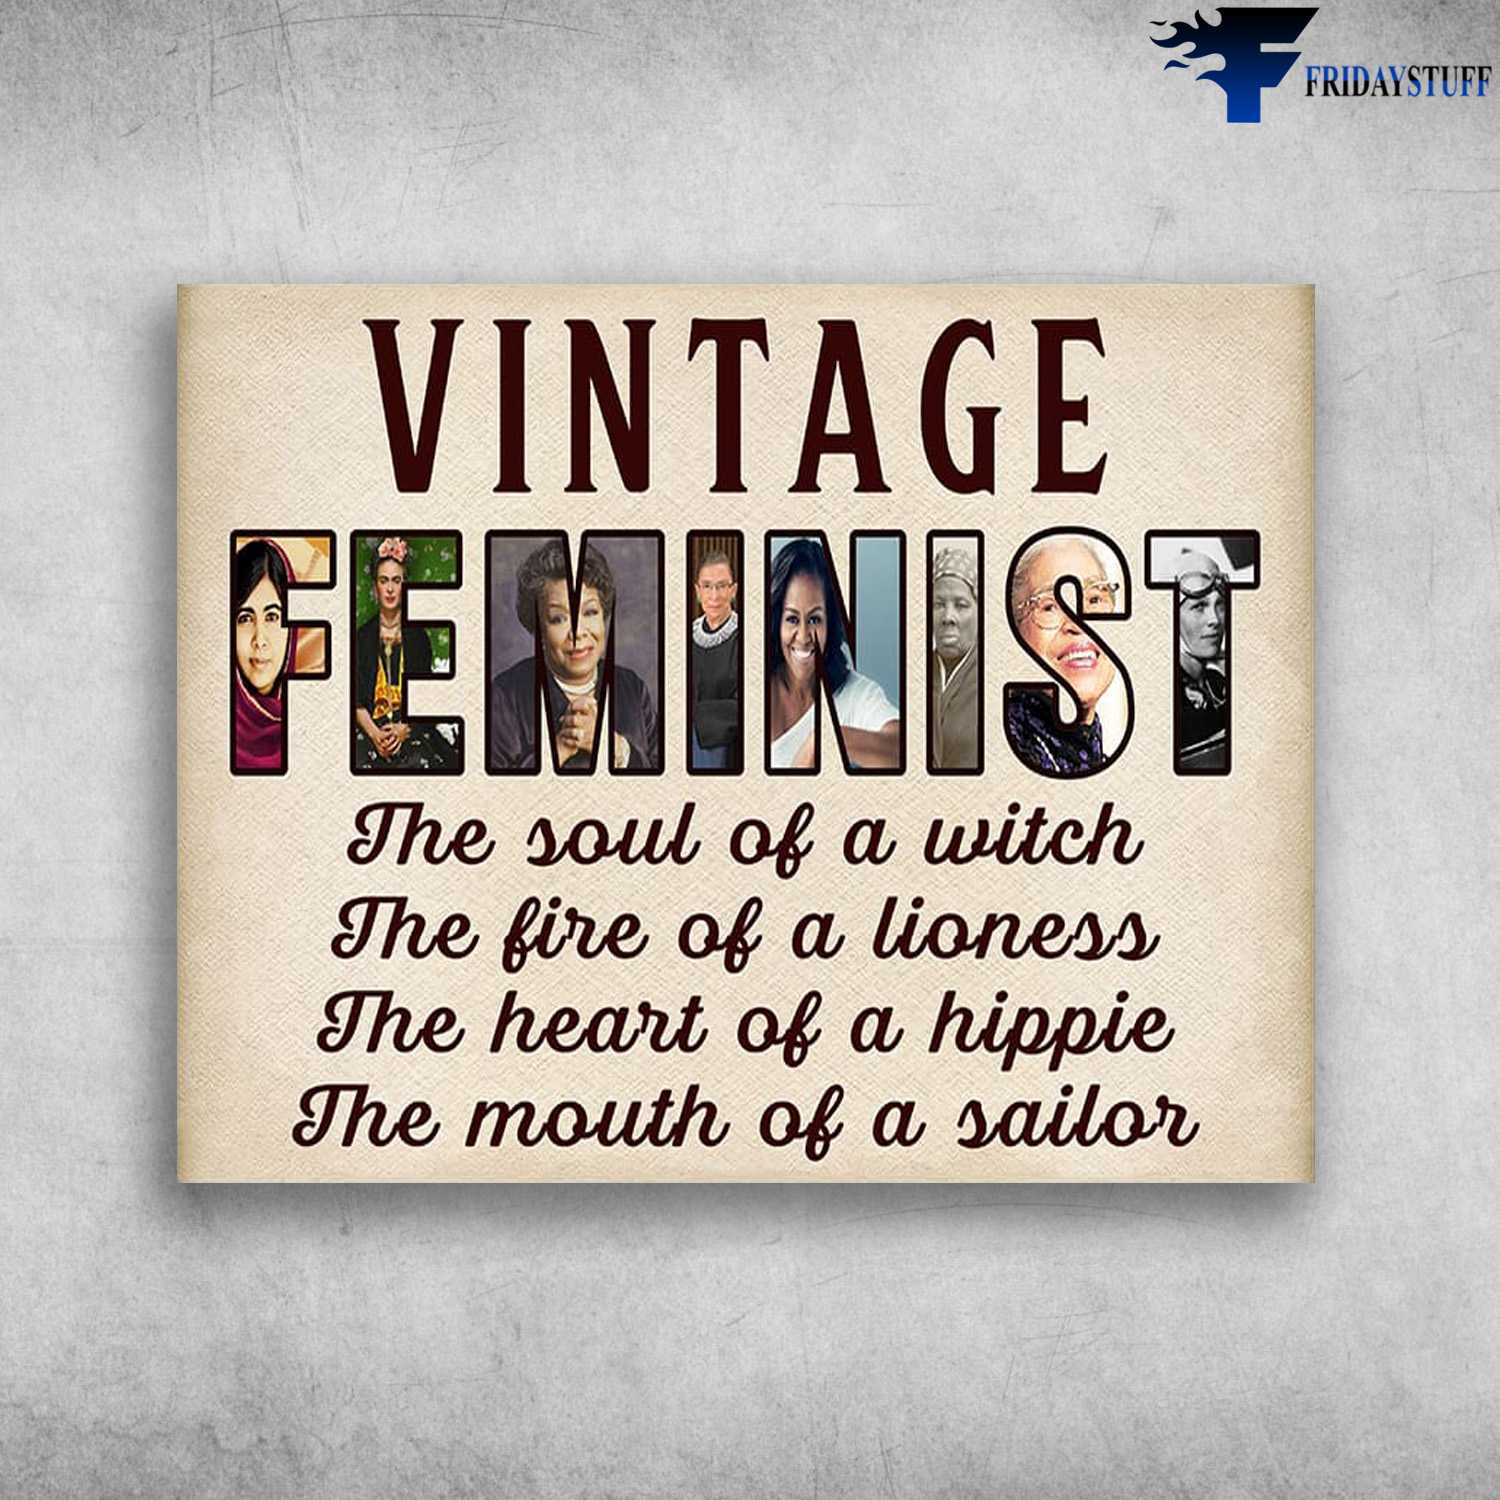 Vintage Feminist, The Soul Of A Witch, The Fire Of A Lioness, The Heart Of A Hippie, The Mounth Of A Sailor